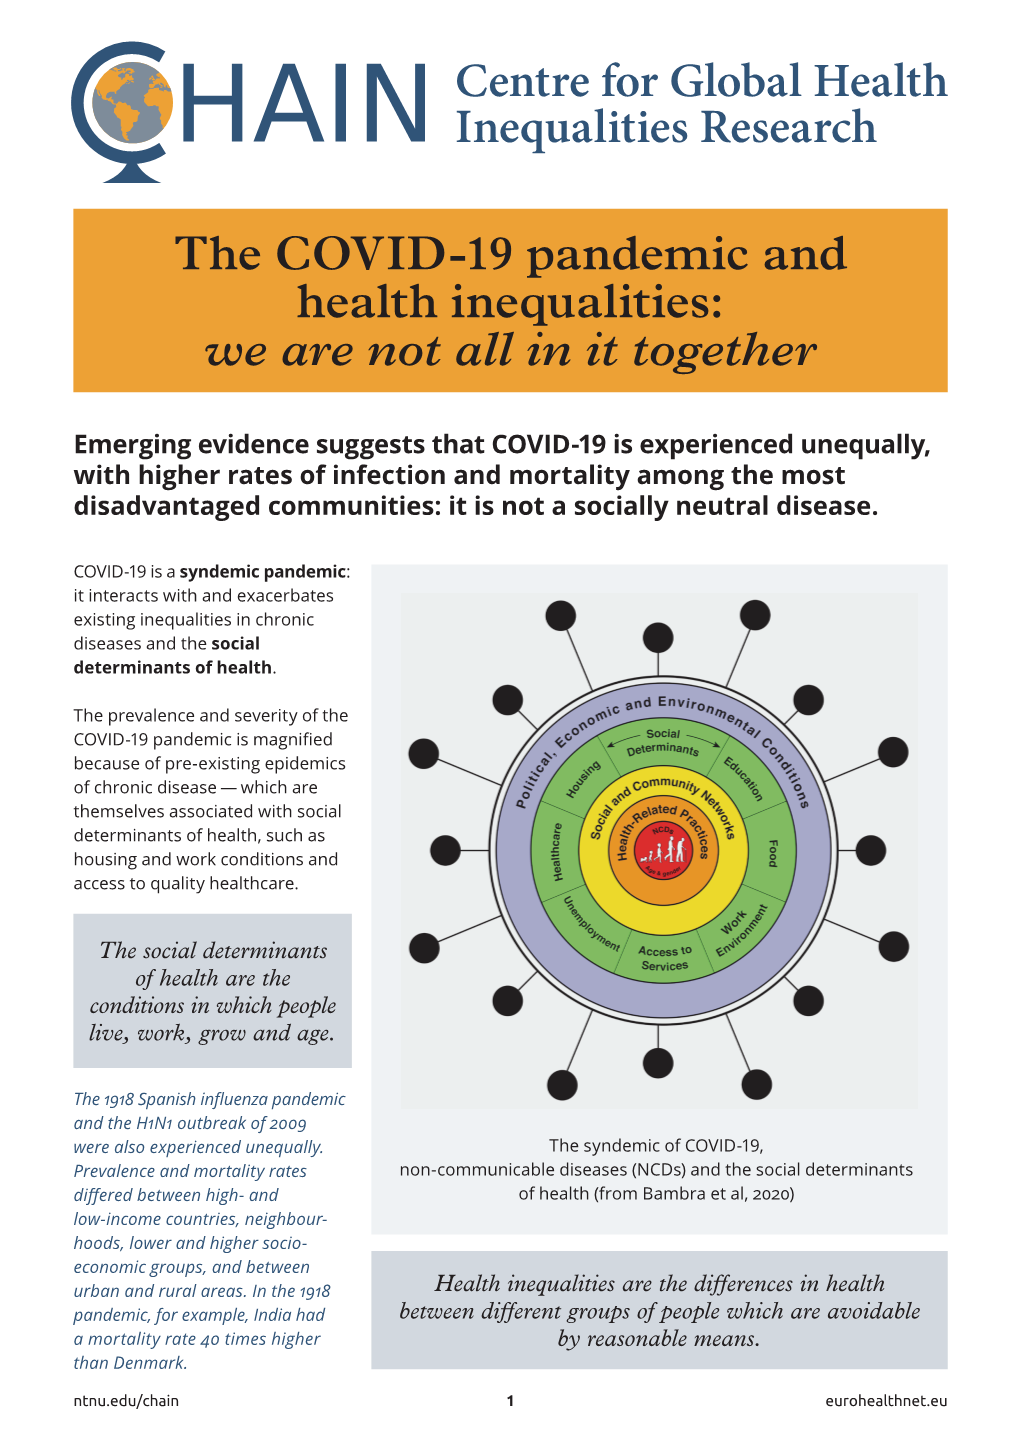 The COVID-19 Pandemic and Health Inequalities: We Are Not All in It Together